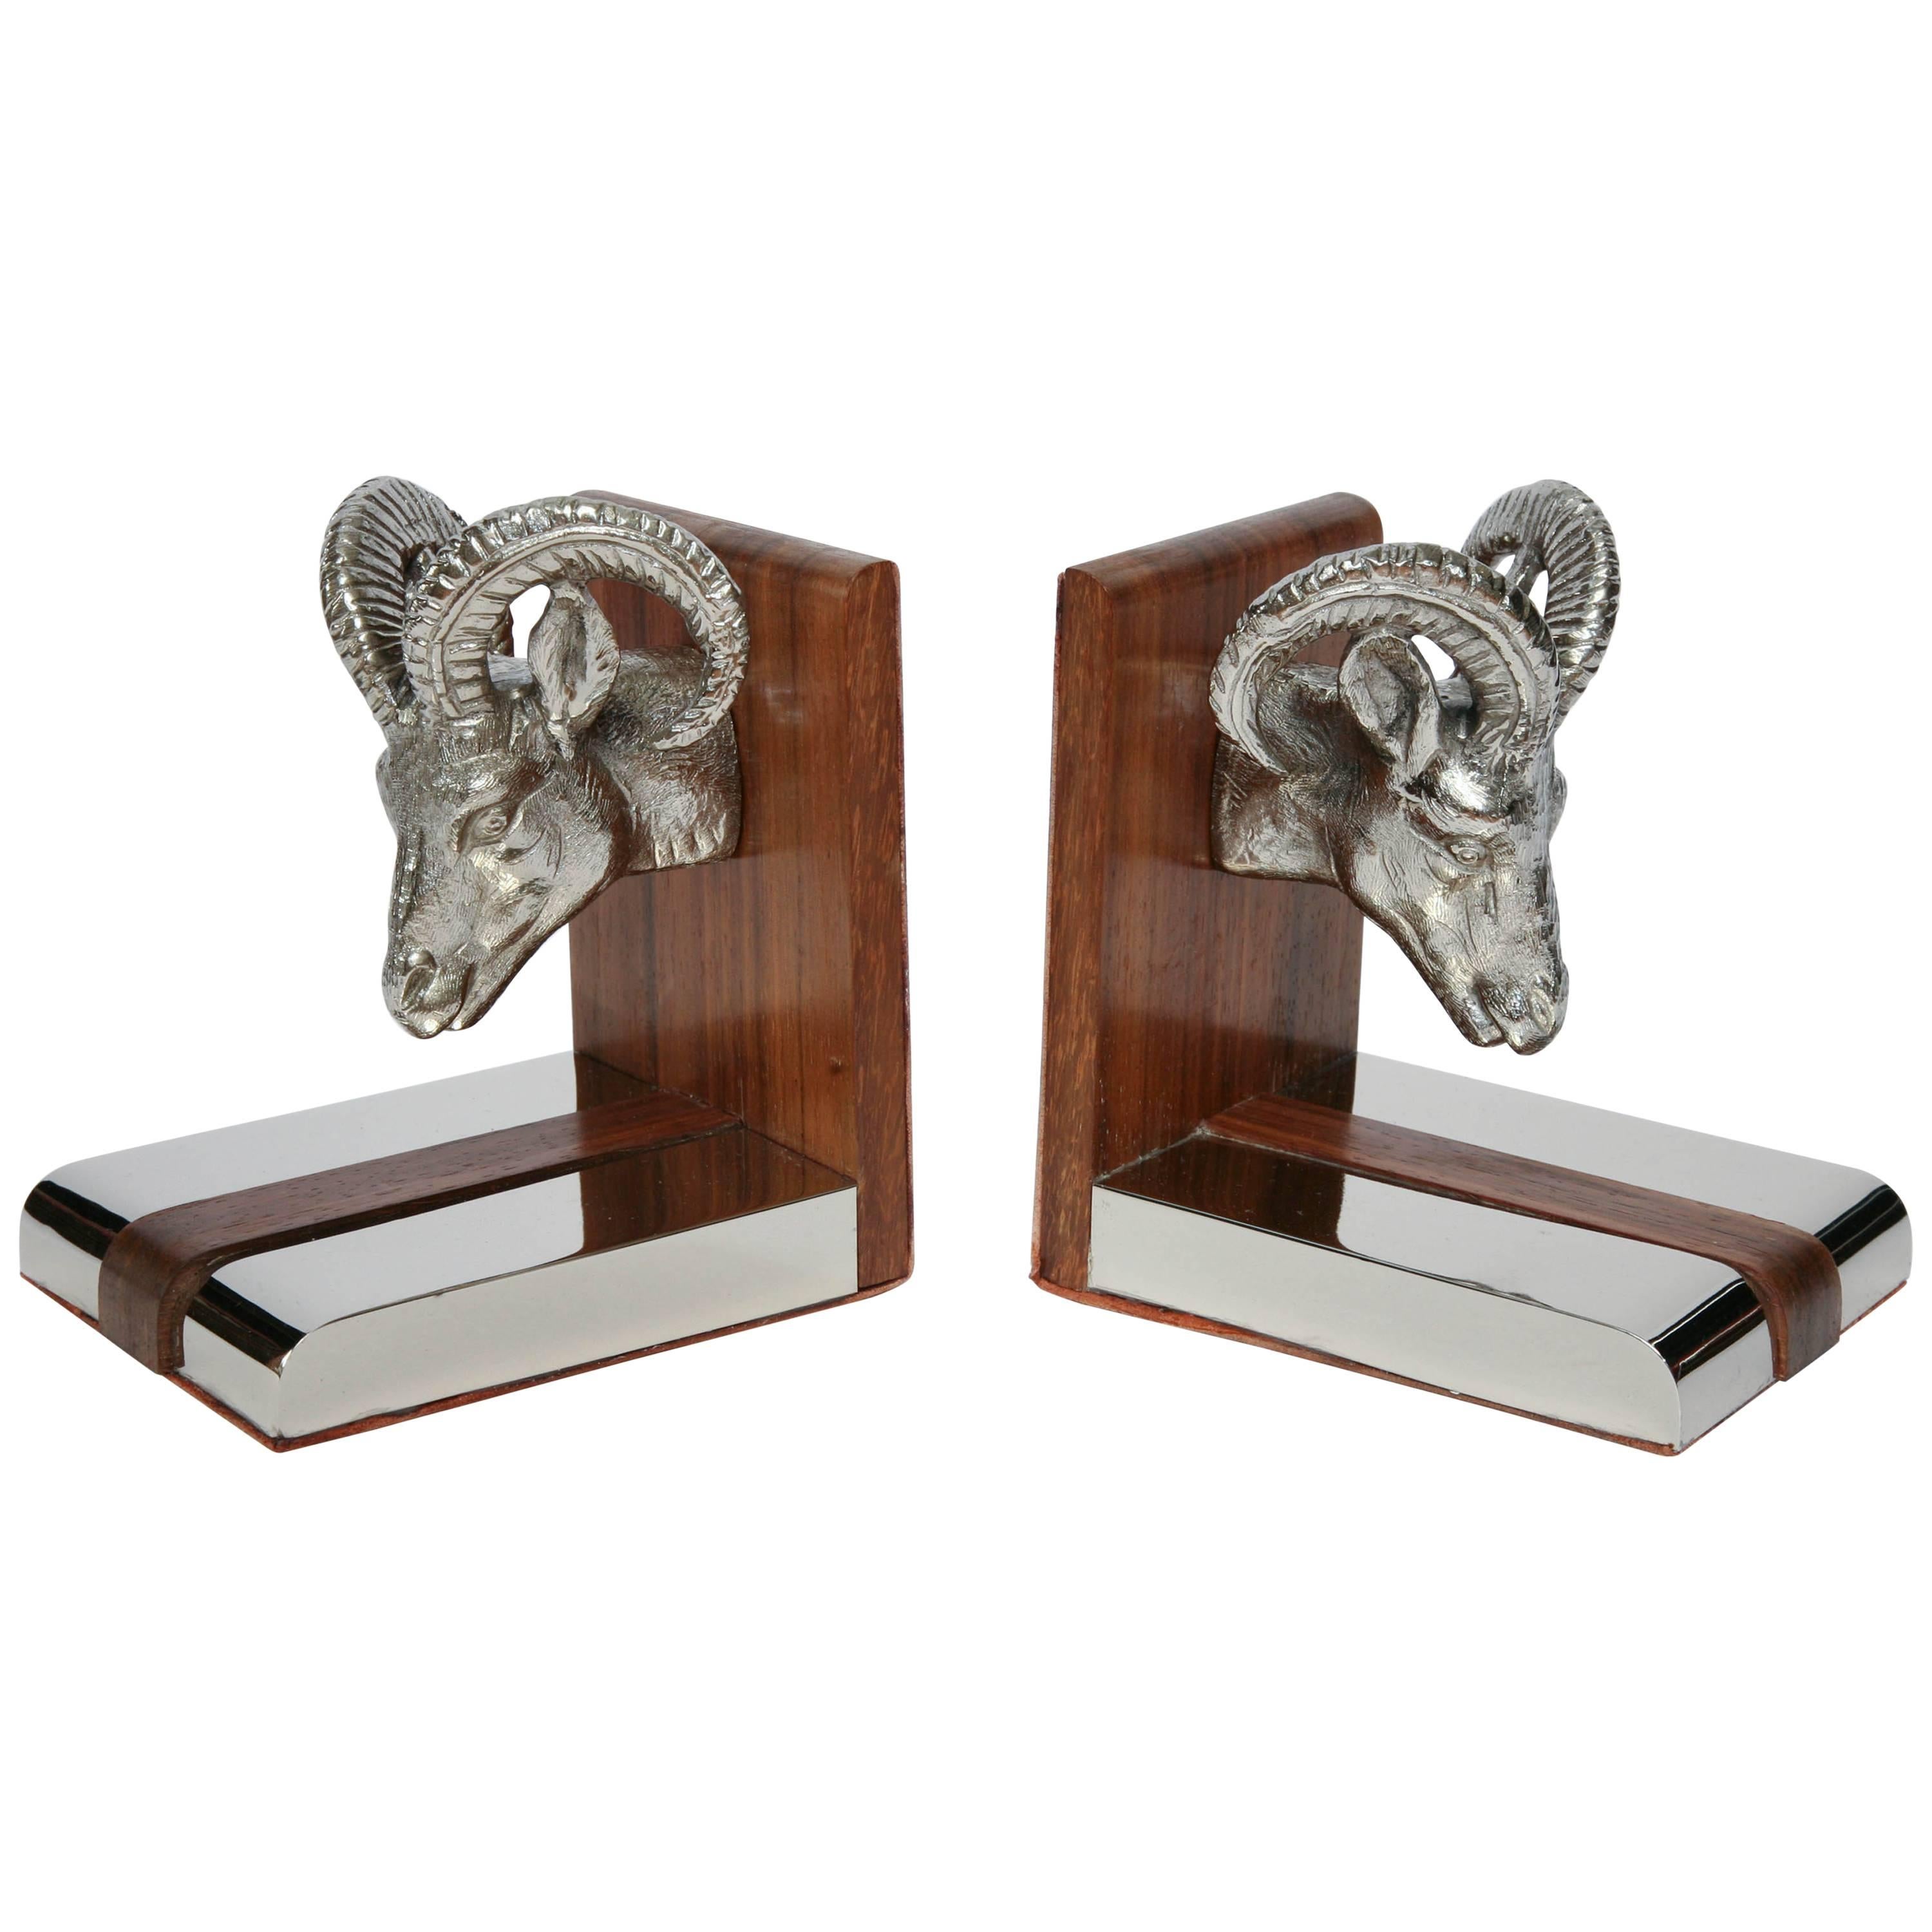 Vintage Gucci Ram's Head Bookends